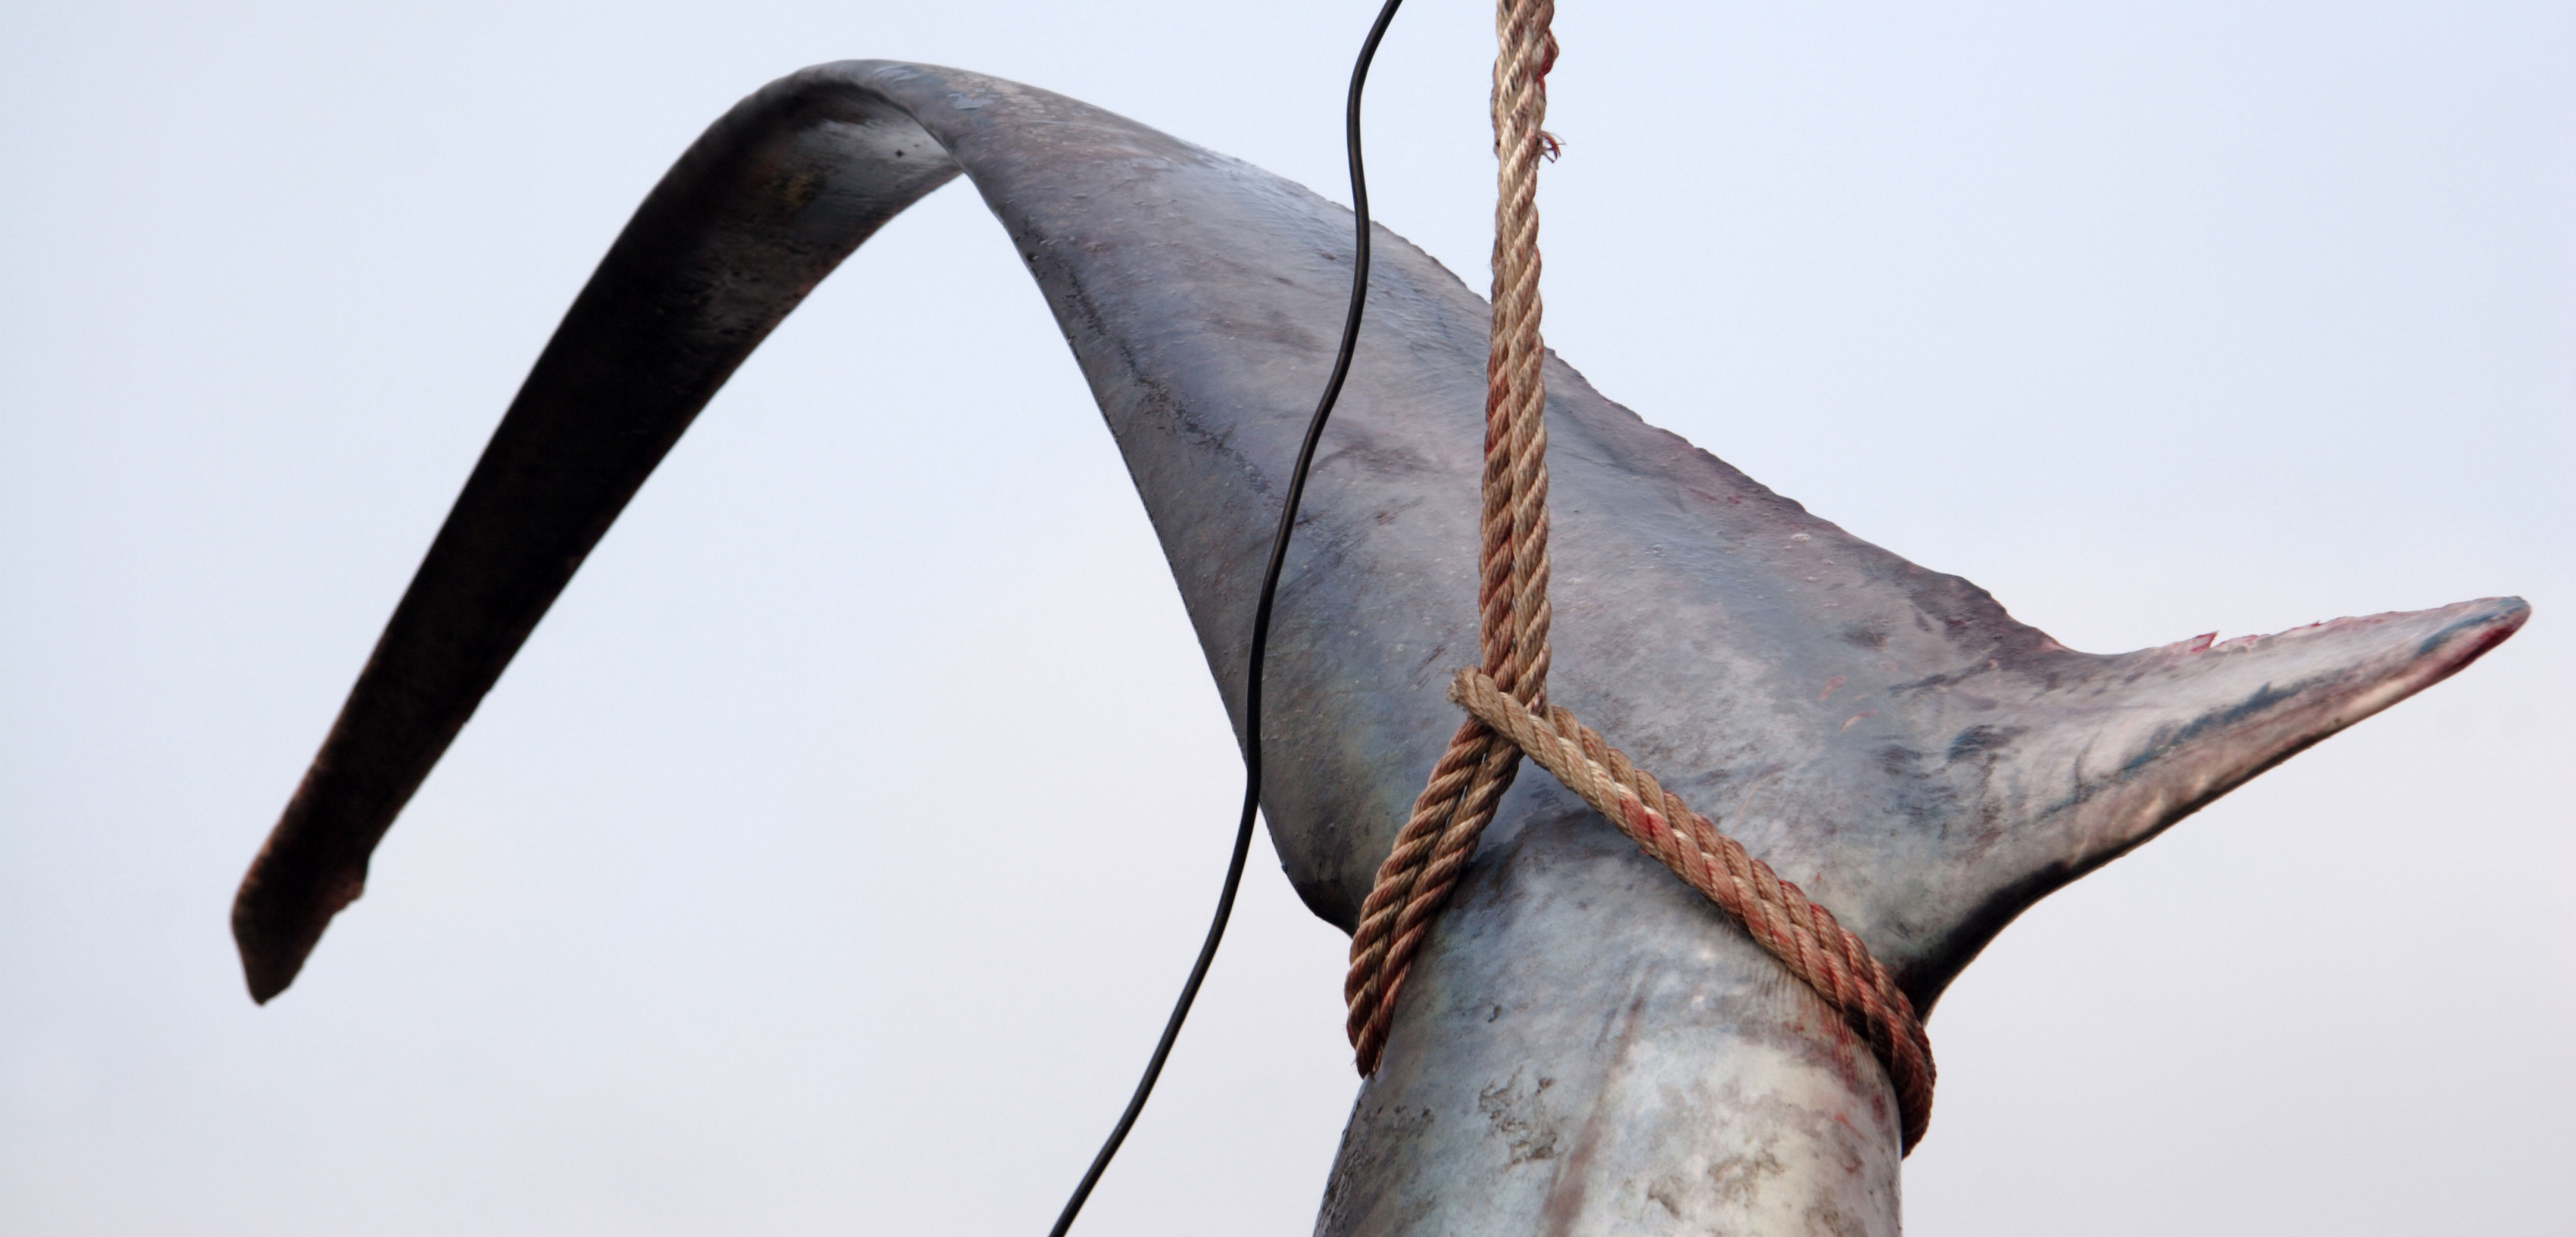 For many species, shark fishing is a legal activity. Photo by Michael Matthews/Alamy Stock Photo